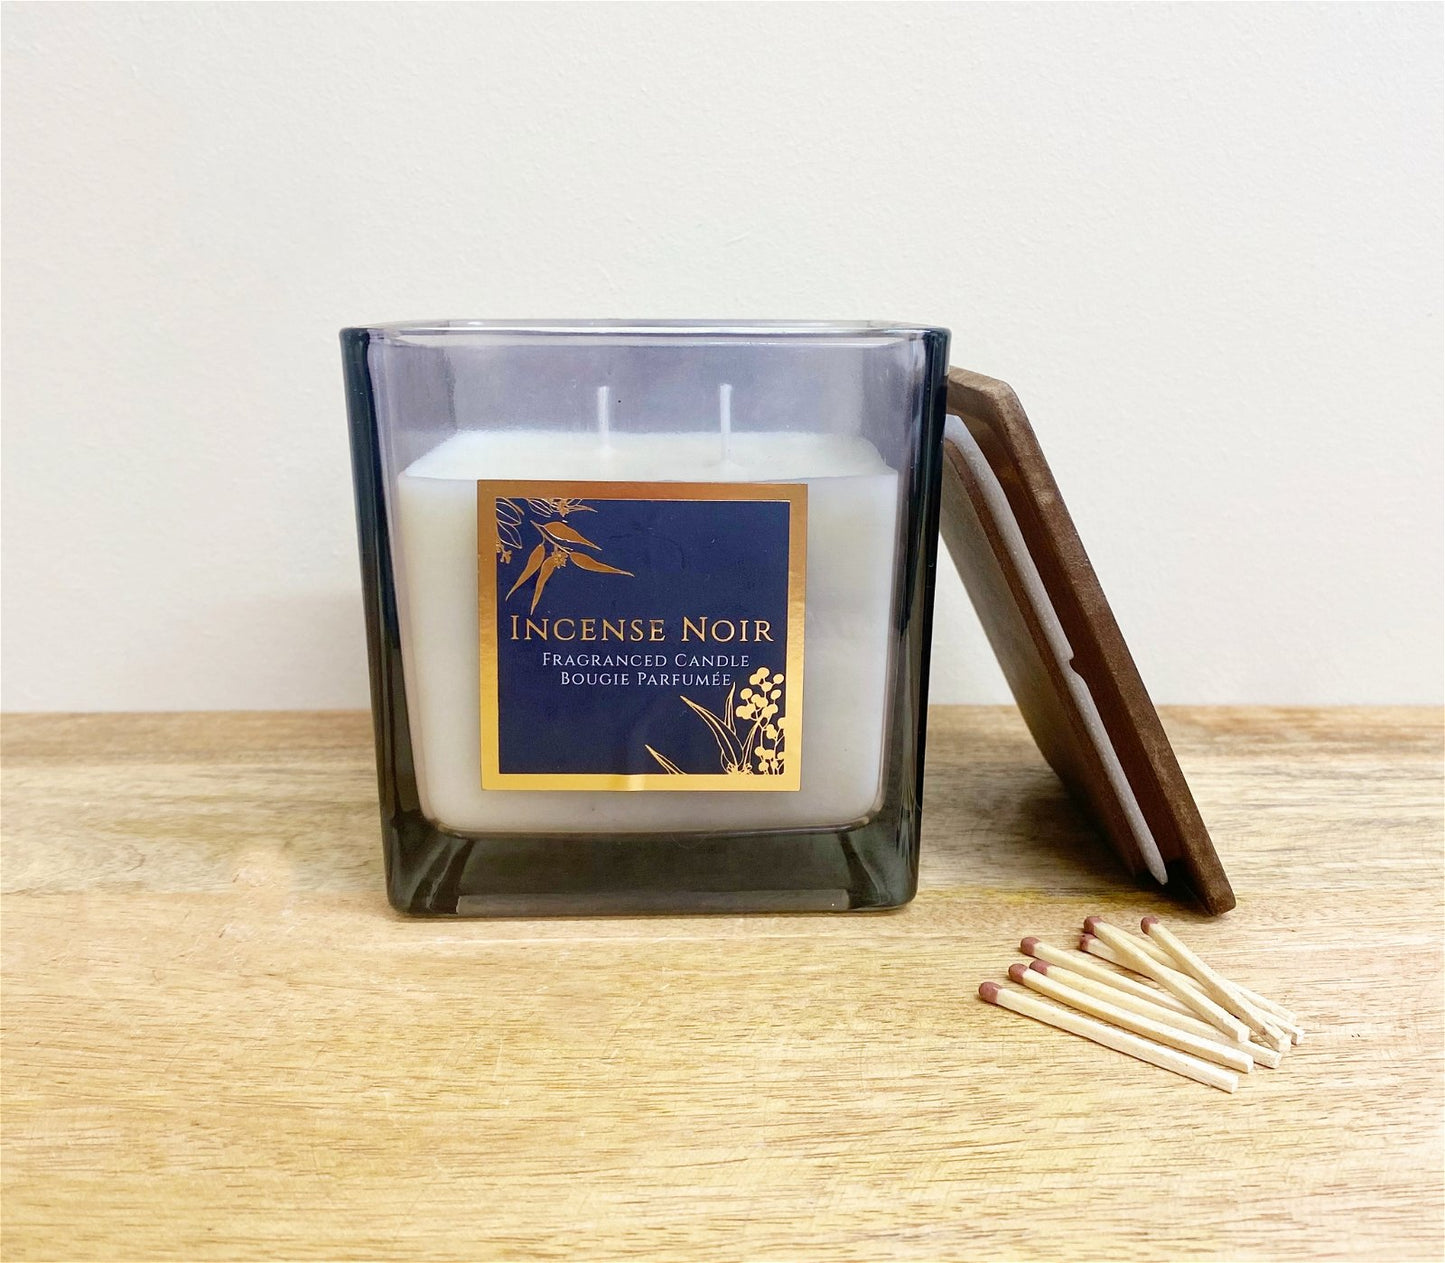 Incense Noir Scented Candle With Wooden Lid